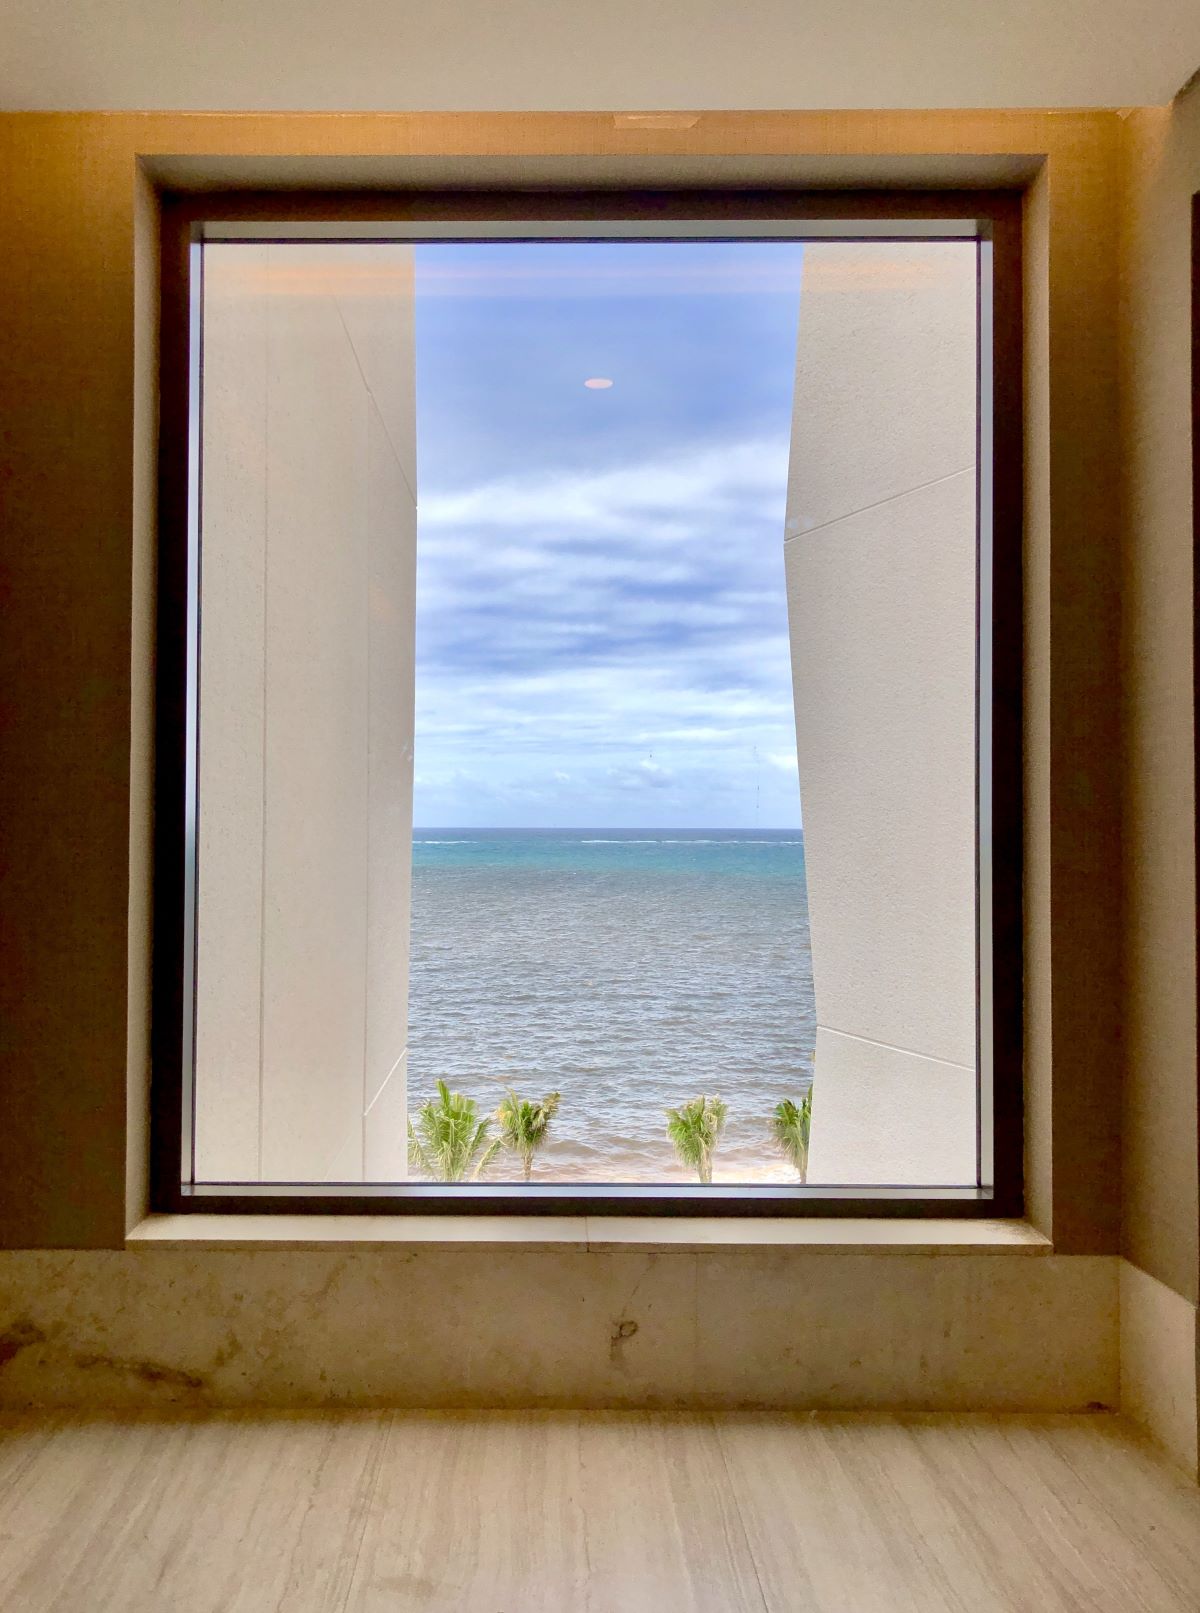 Hall window overlooking the ocean and palmtrees